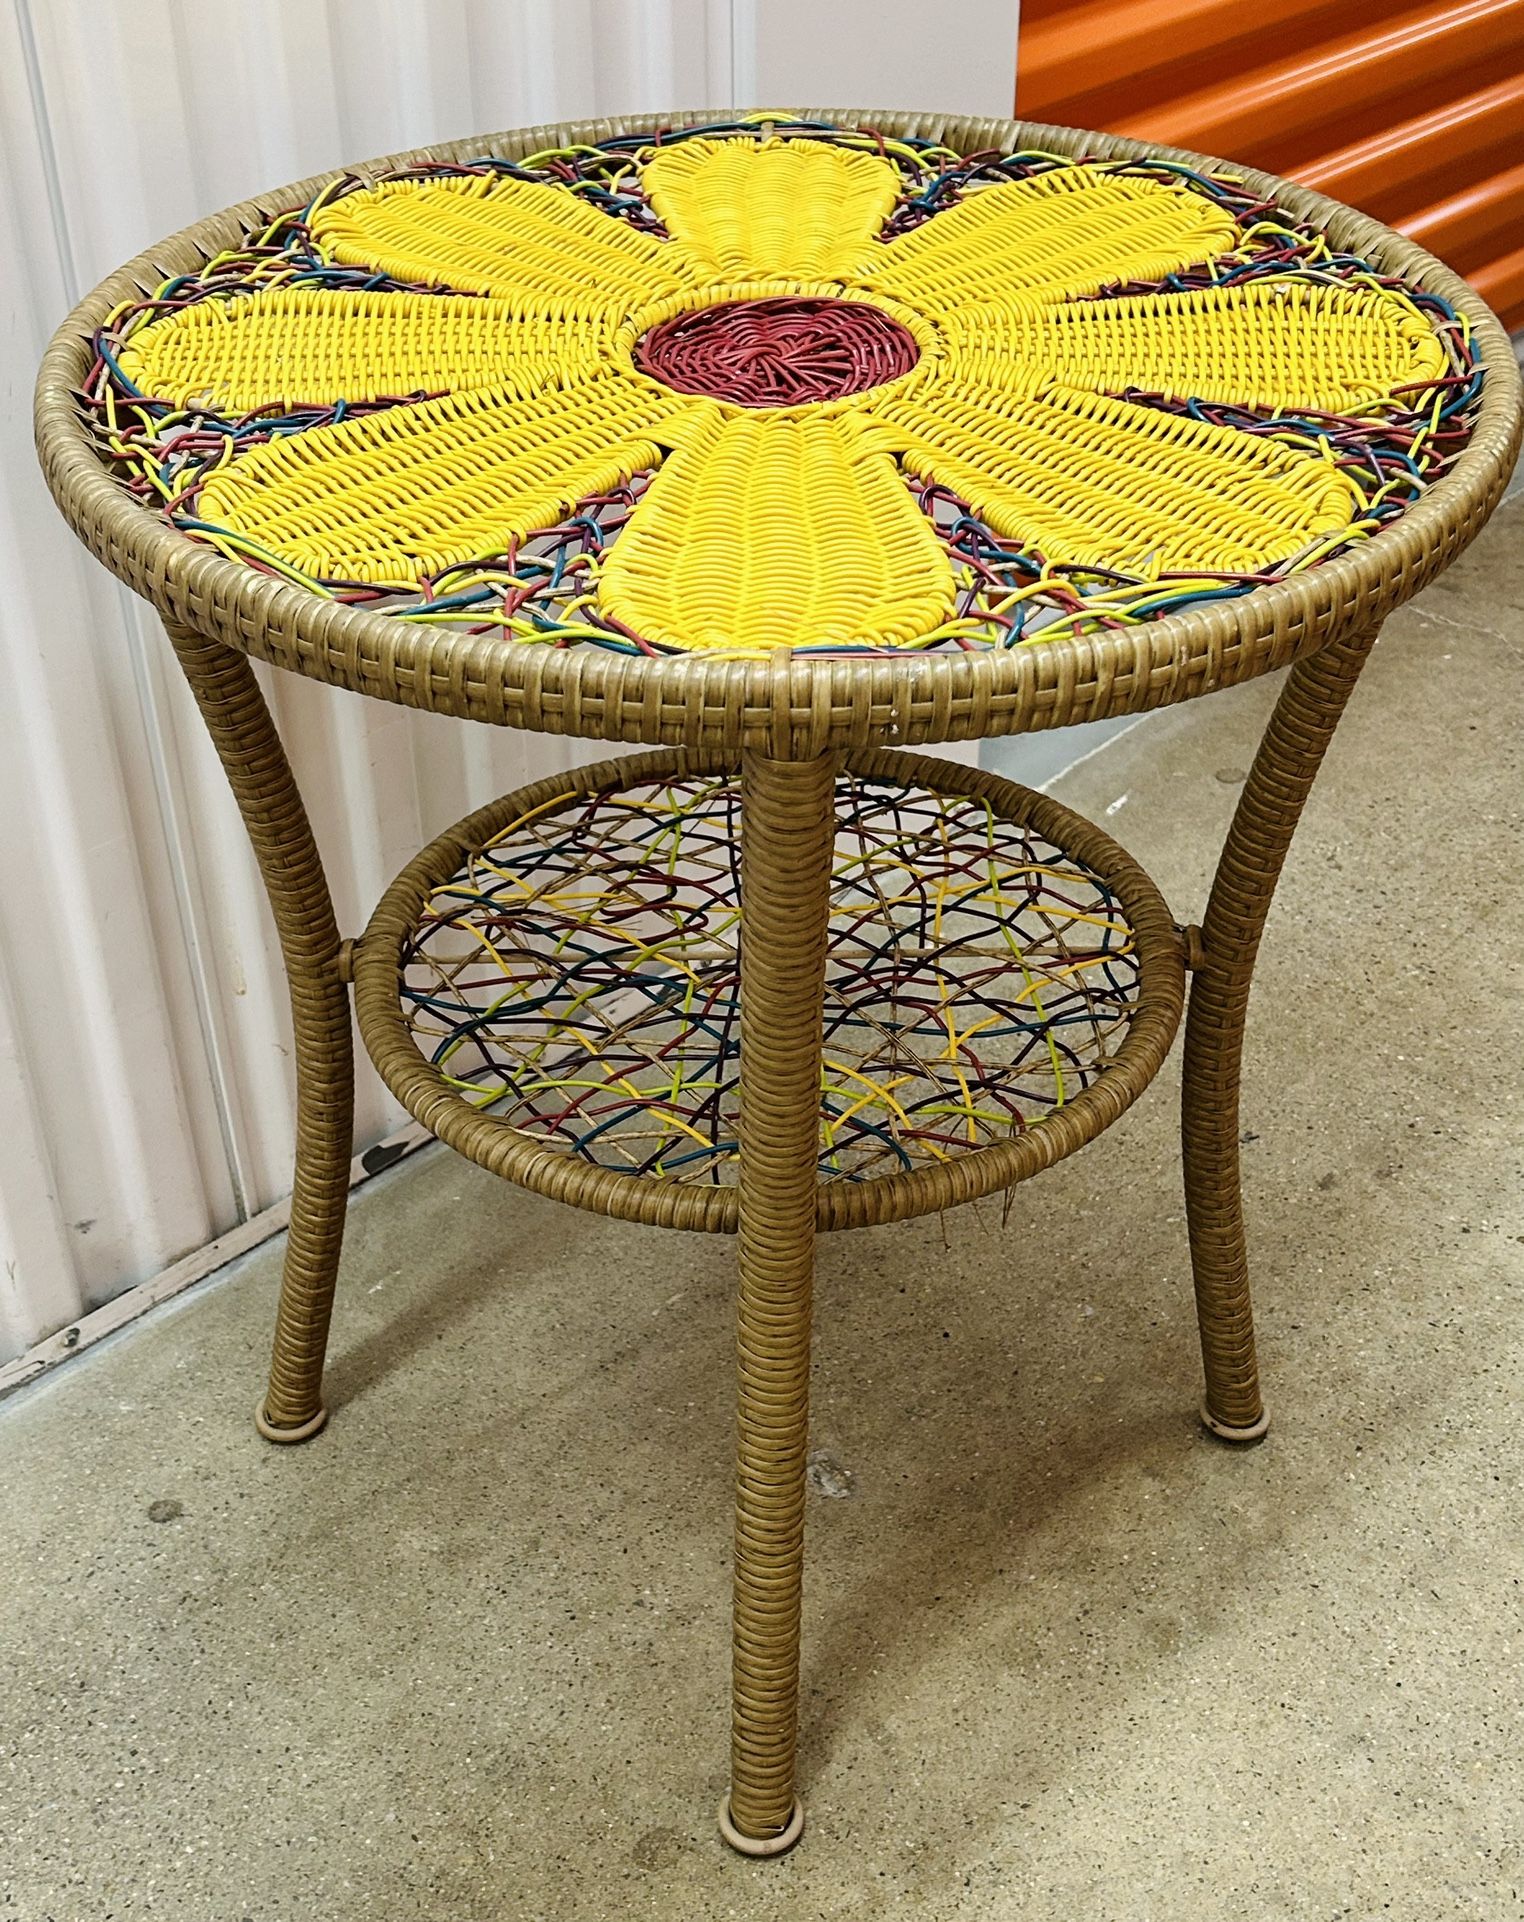 Vintage PIER 1 IMPORTS All Weather Rattan Daisy Side Table